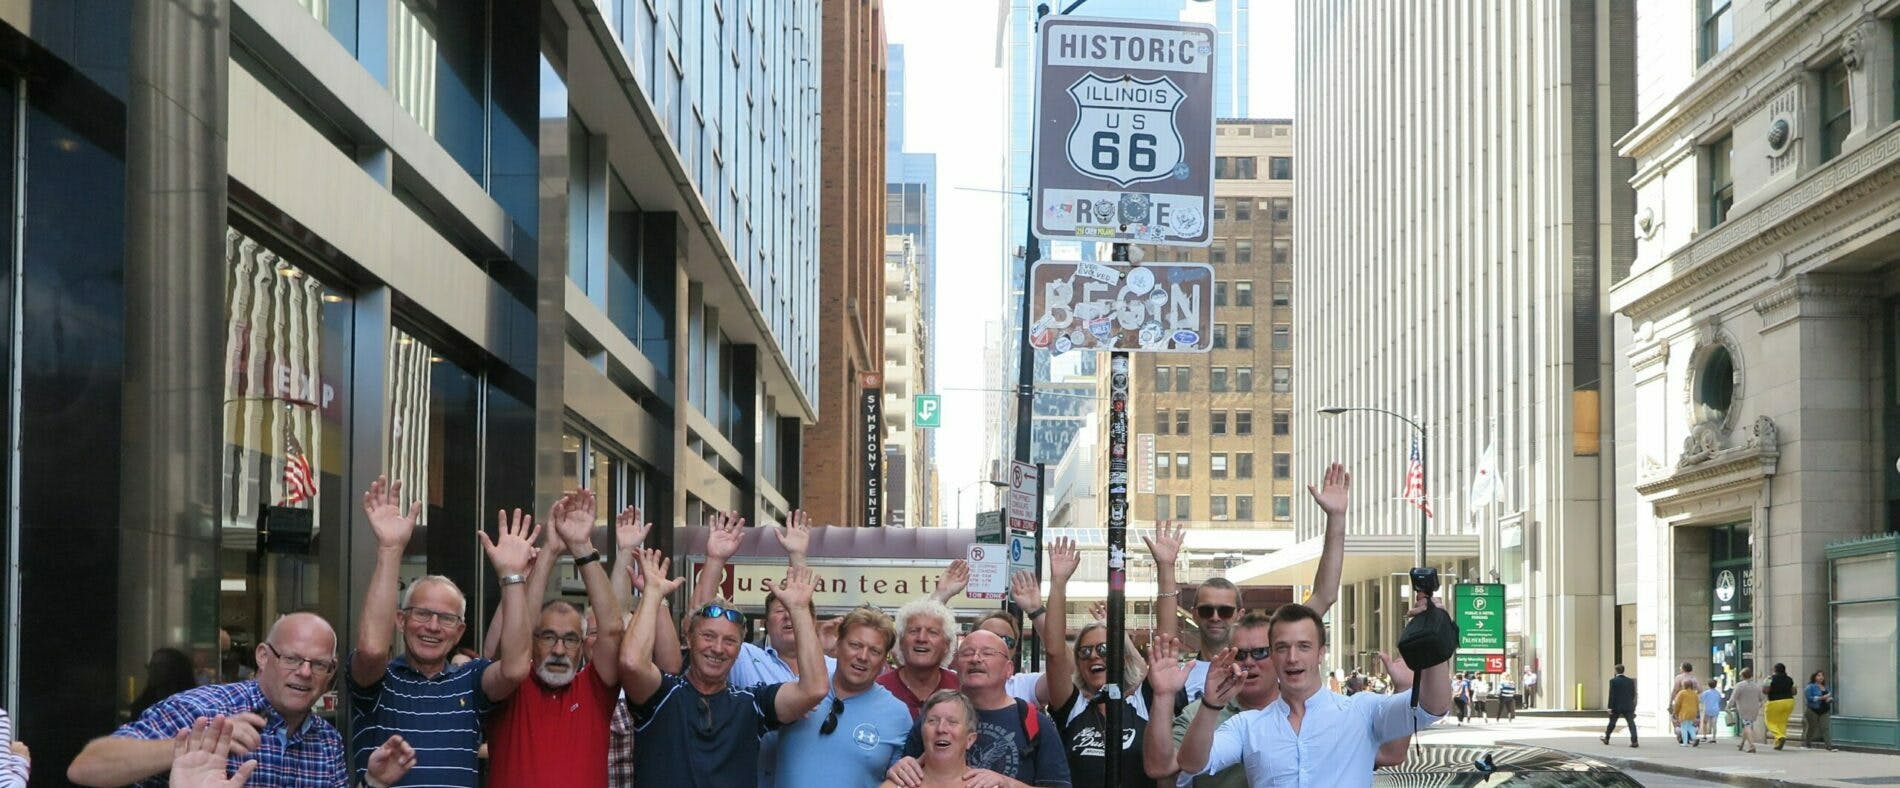 Historic Route 66 Begin Sign in Chicago